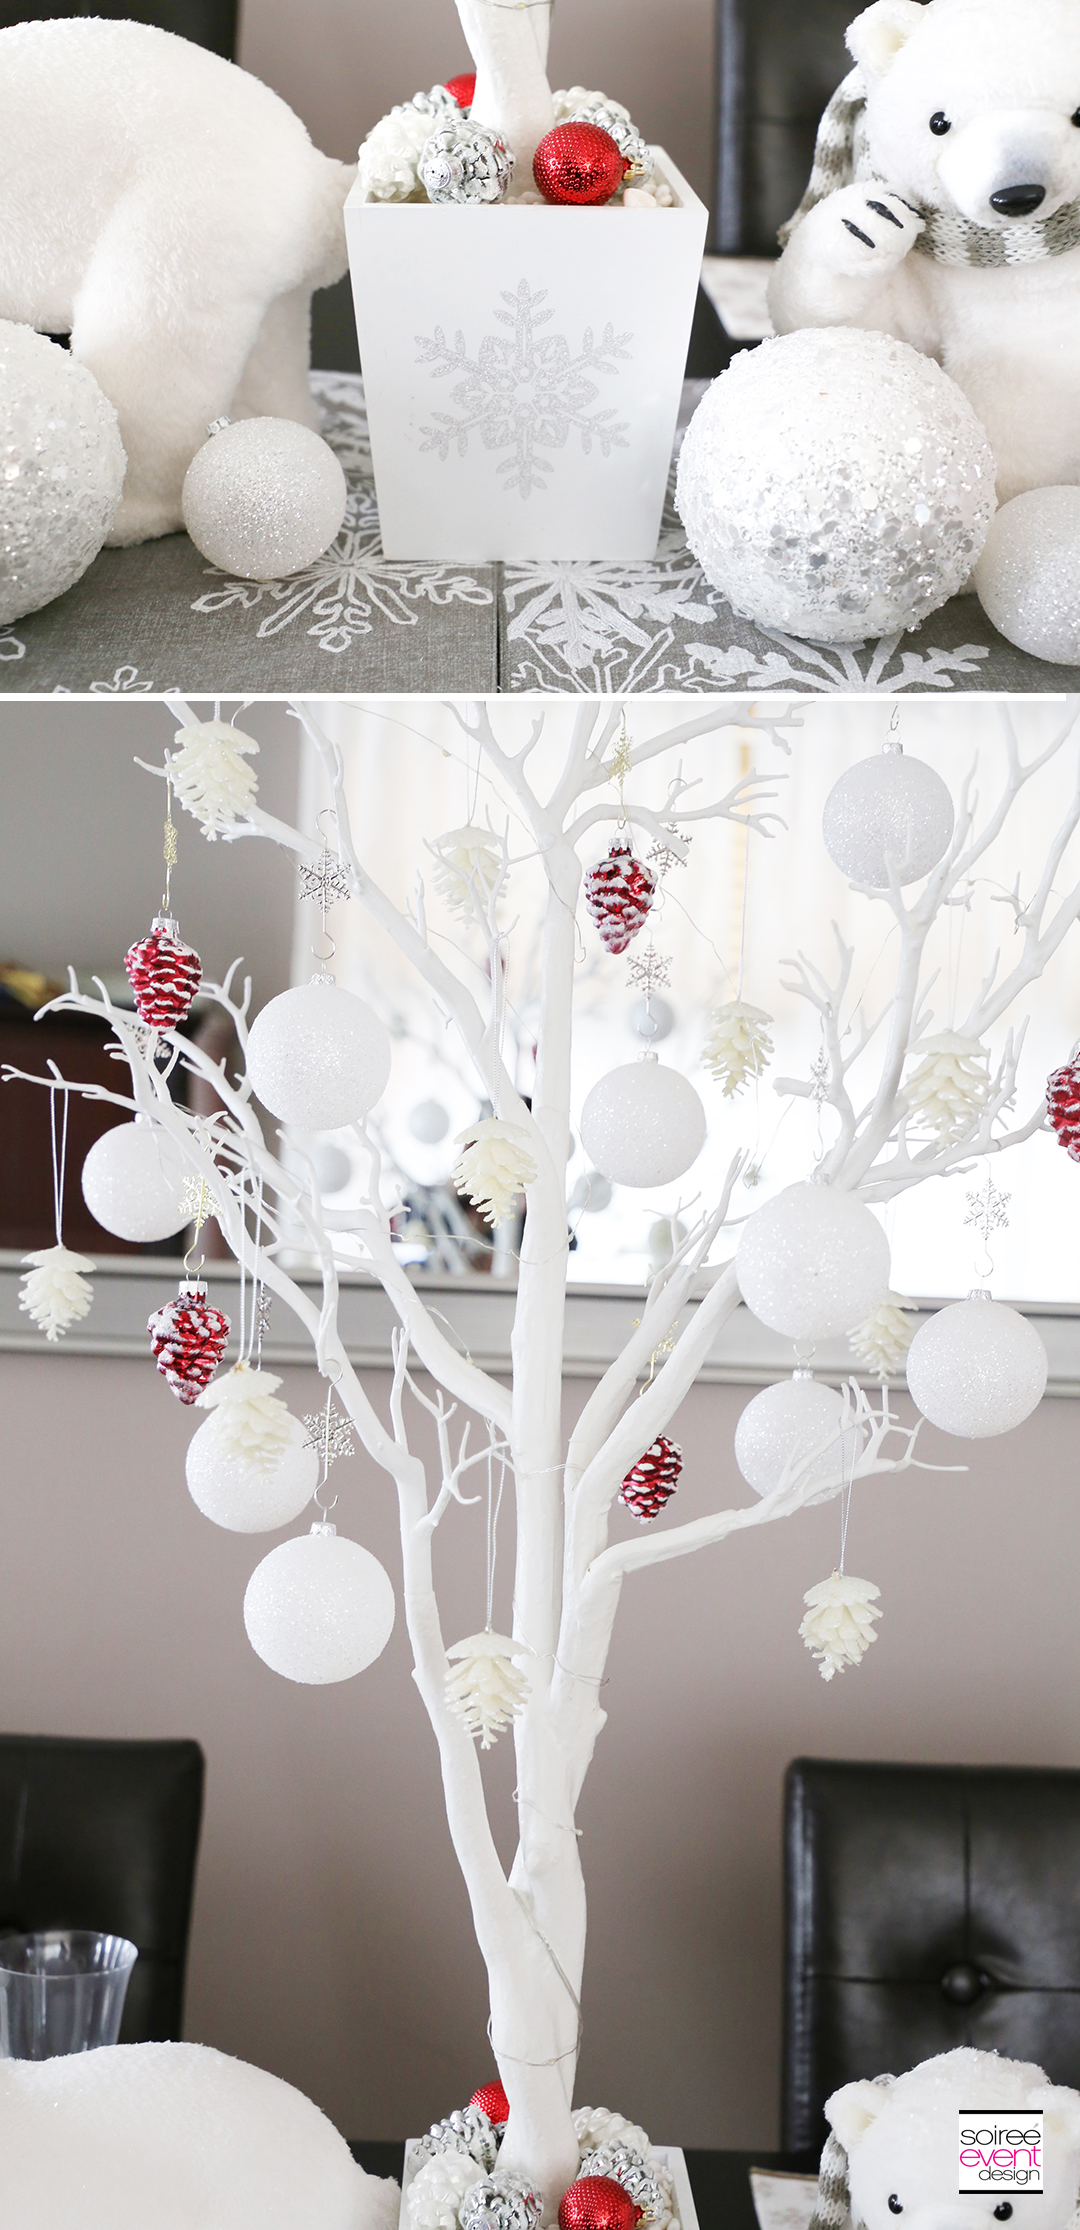 Personalized Christmas Tablescapes - White tree